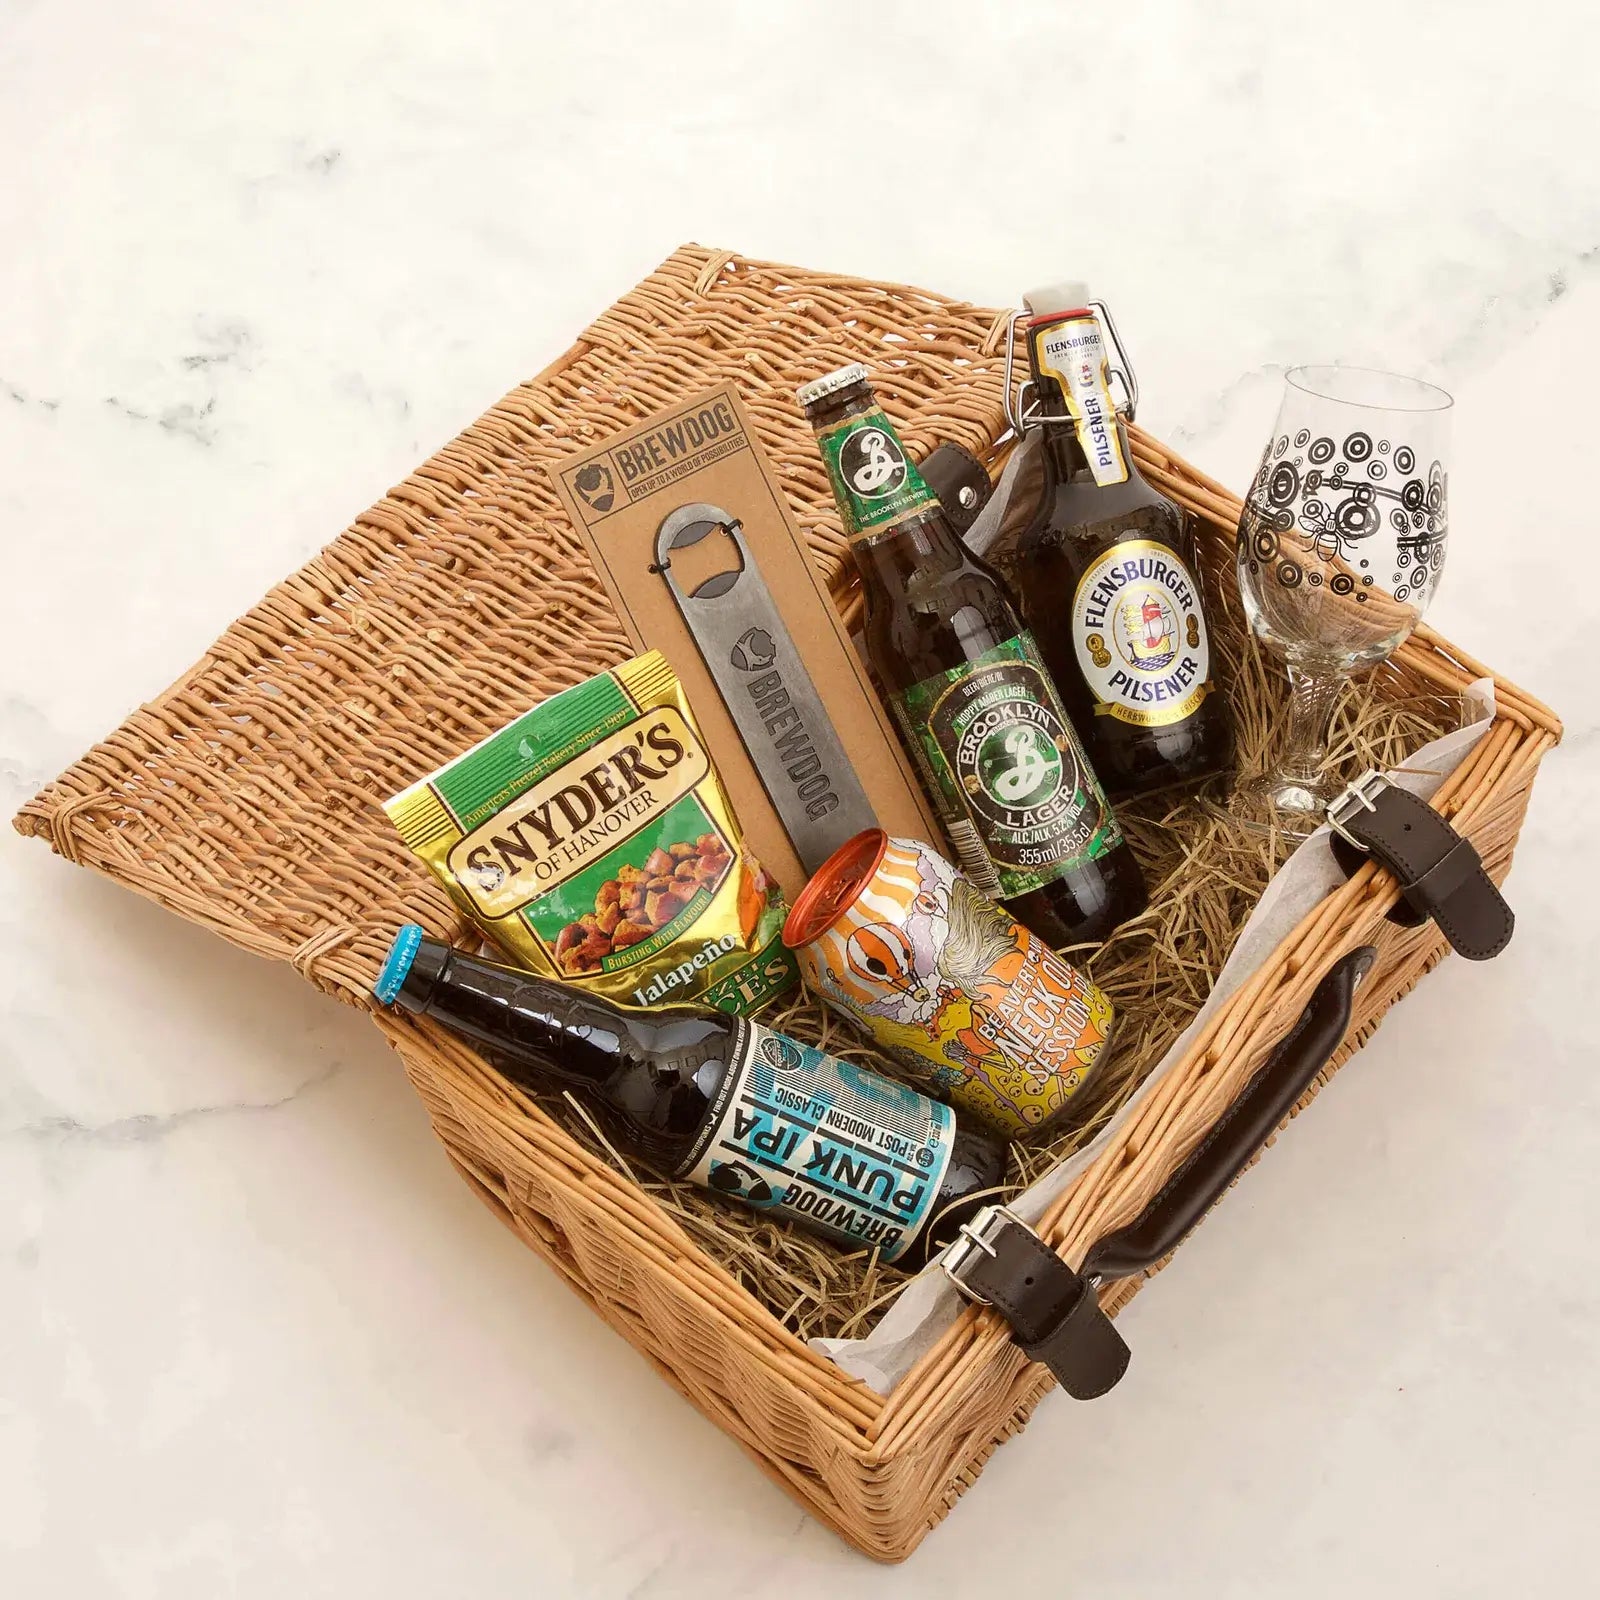 Estate ale and snack selection | Gifts from Chatsworth – Chatsworth Shop